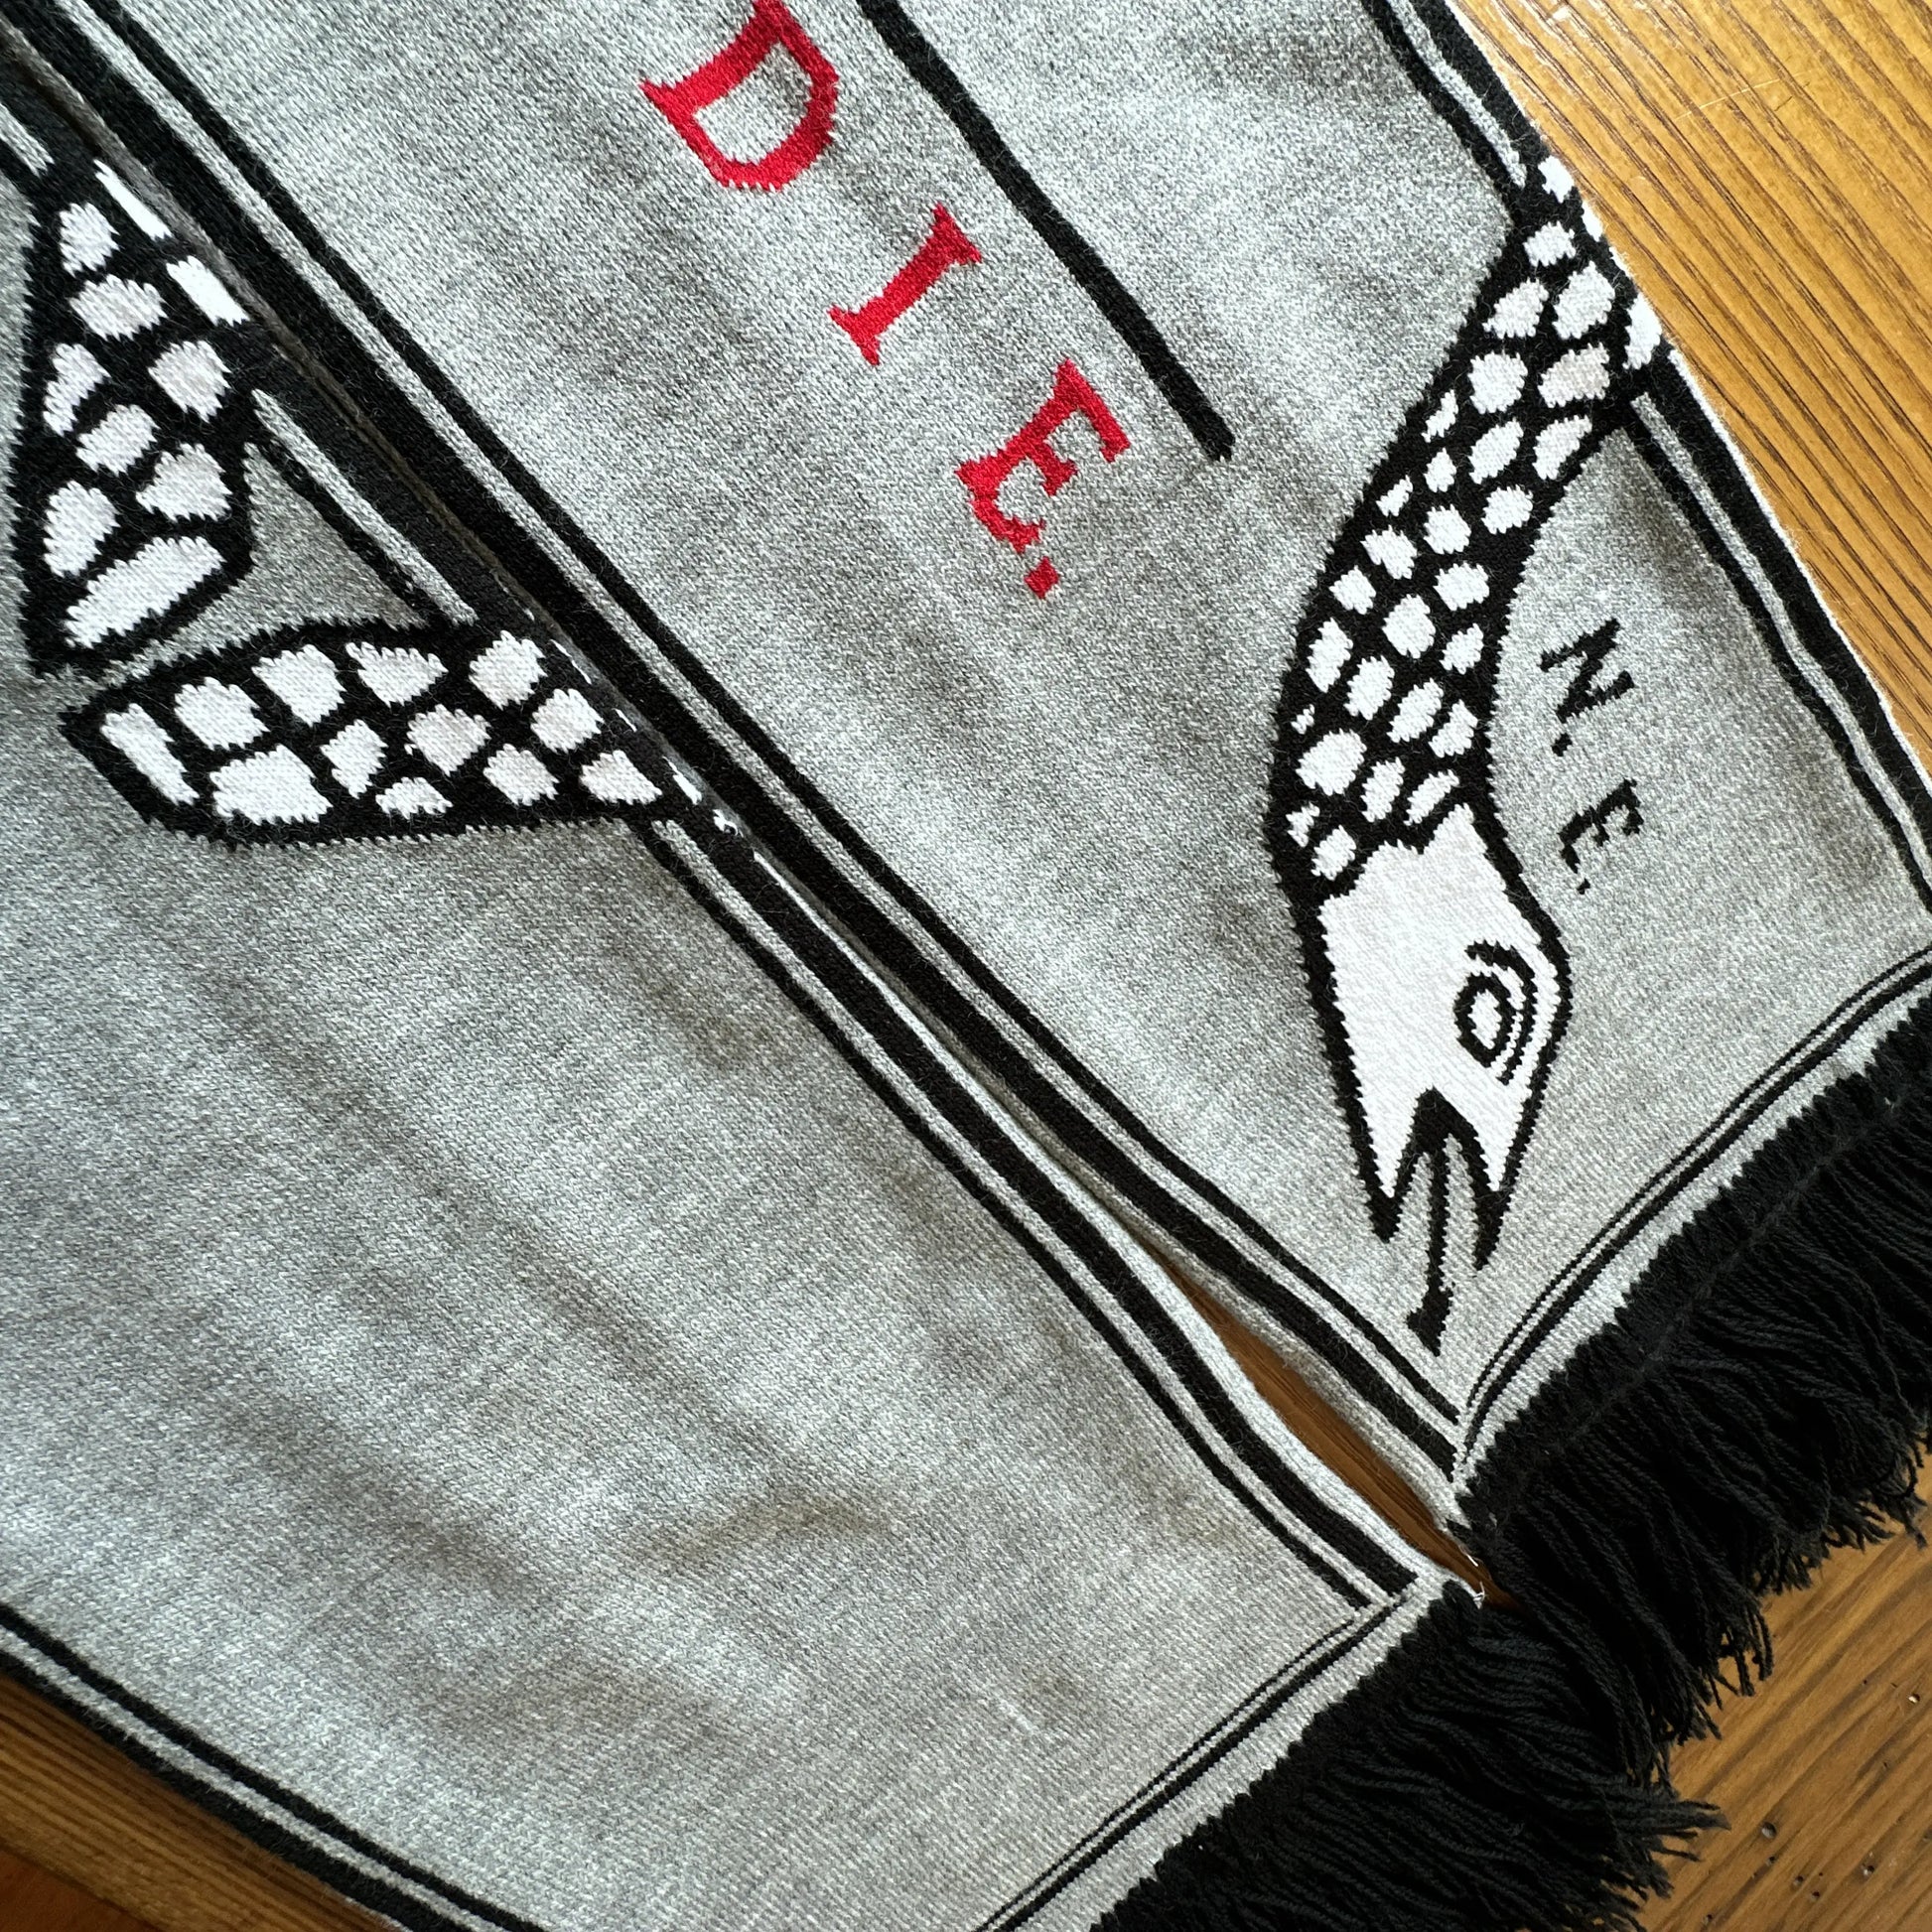 Snake from the "Join or Die" woven scarf — Made in America from The History List store